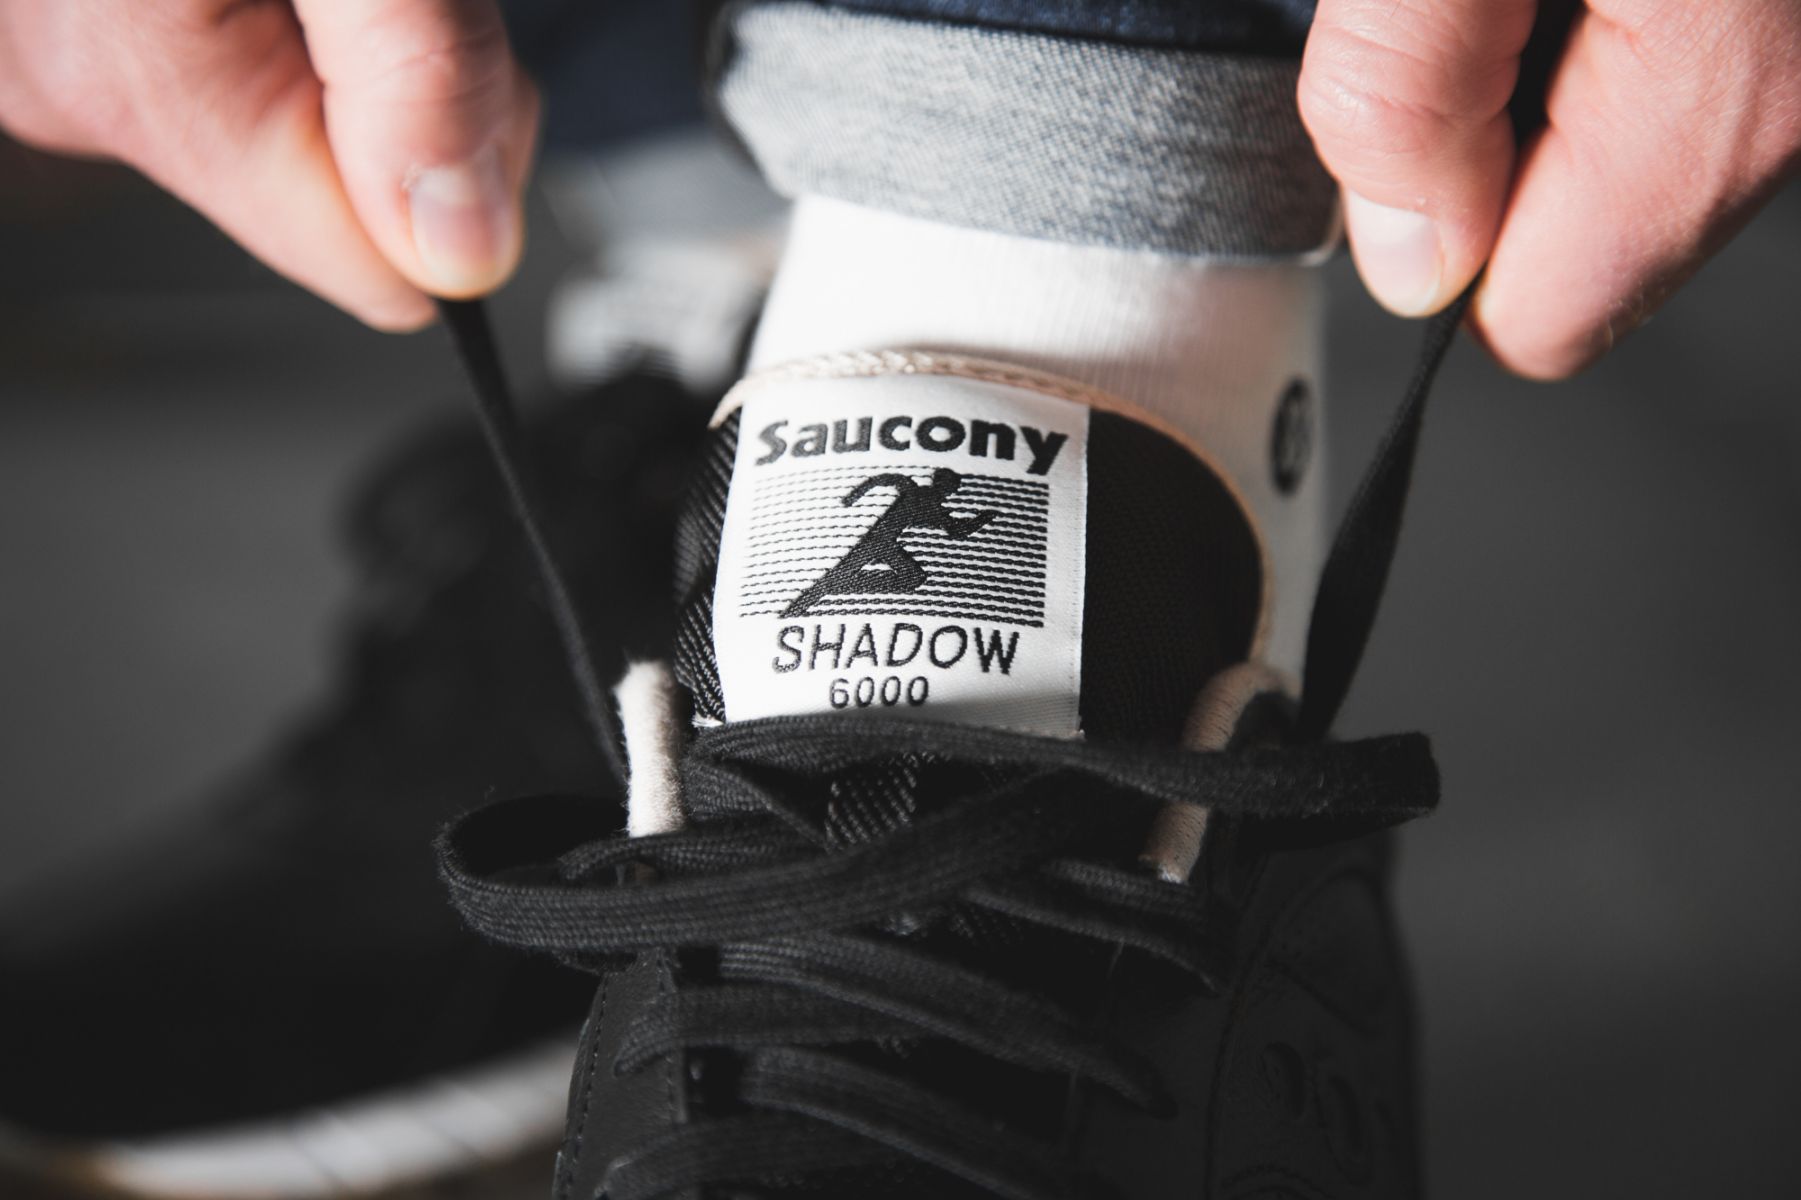 Saucony Shadow 6000 Ht Perf S70349 1 Mood 3